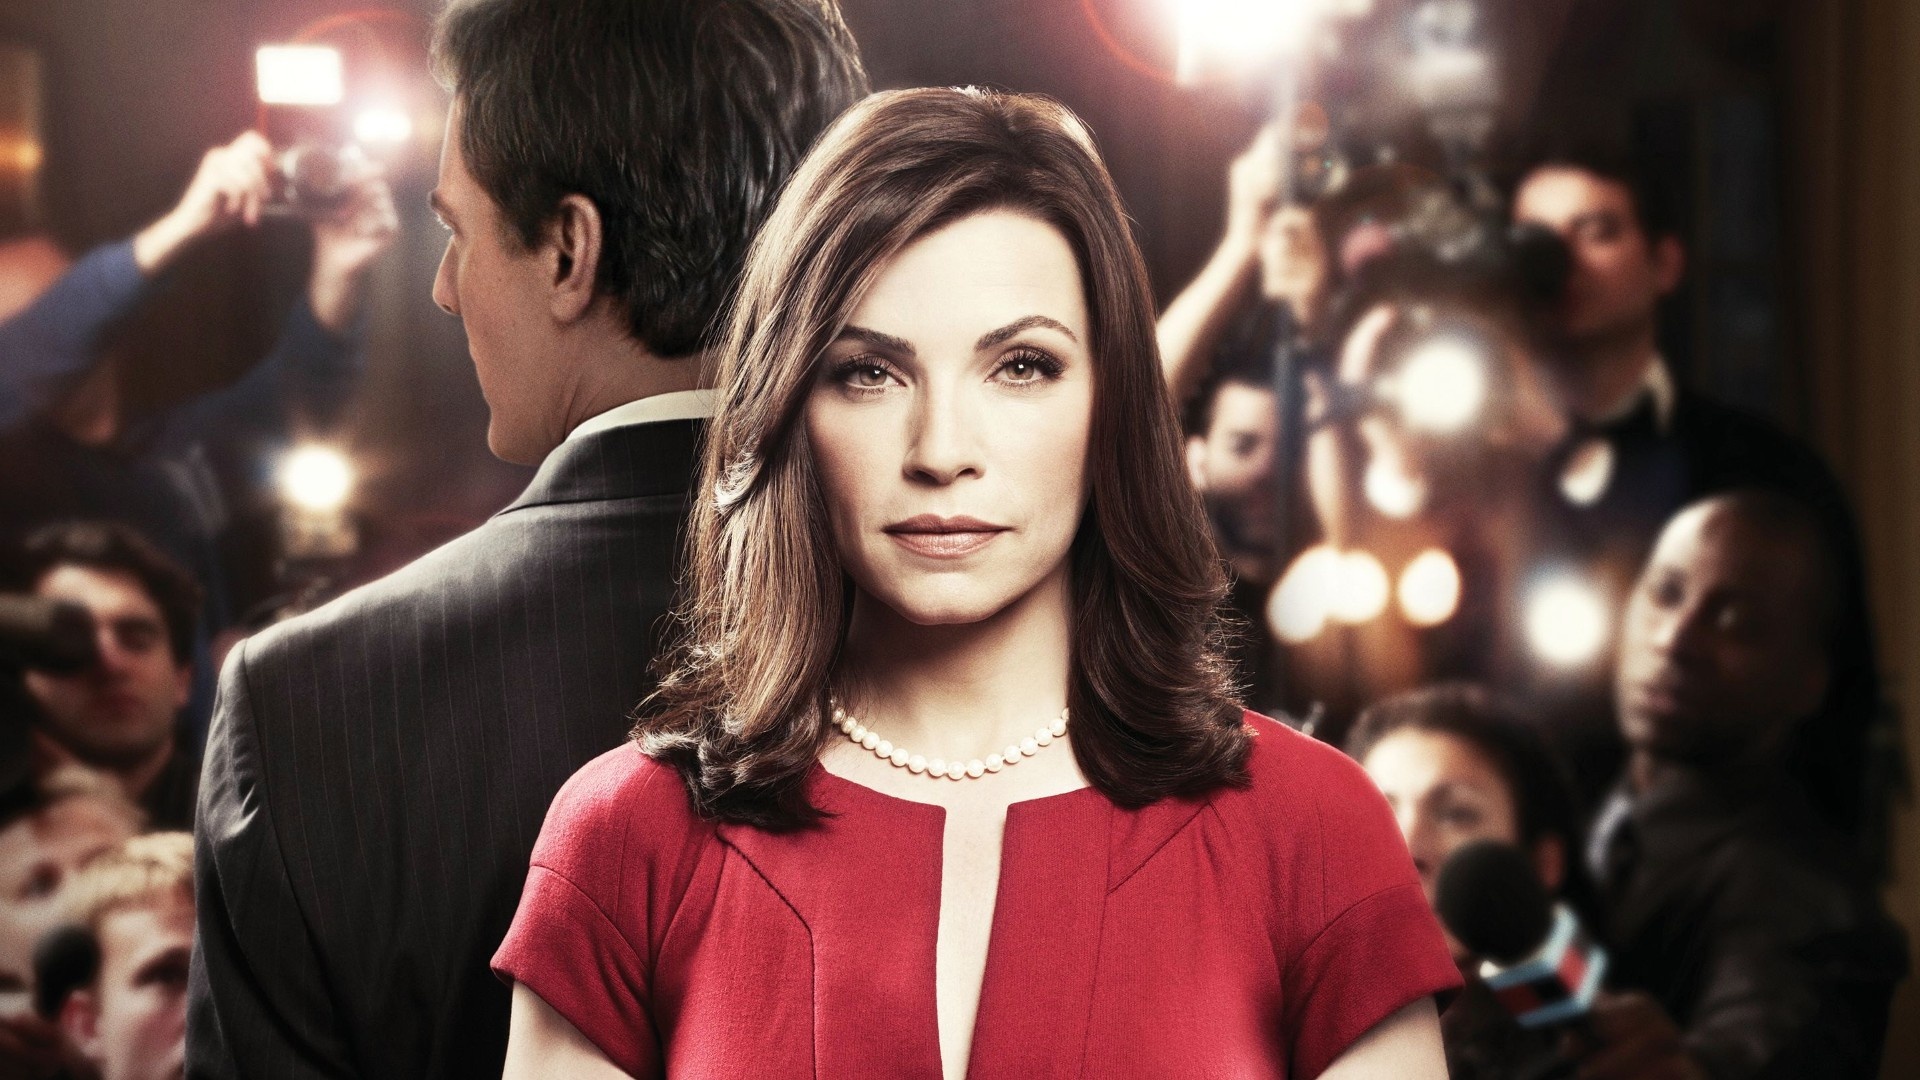 The Good Wife (TV Series): A drama starring Emmy Award winner Julianna Margulies, Portrayal of a strong, complex woman on television series. 1920x1080 Full HD Wallpaper.